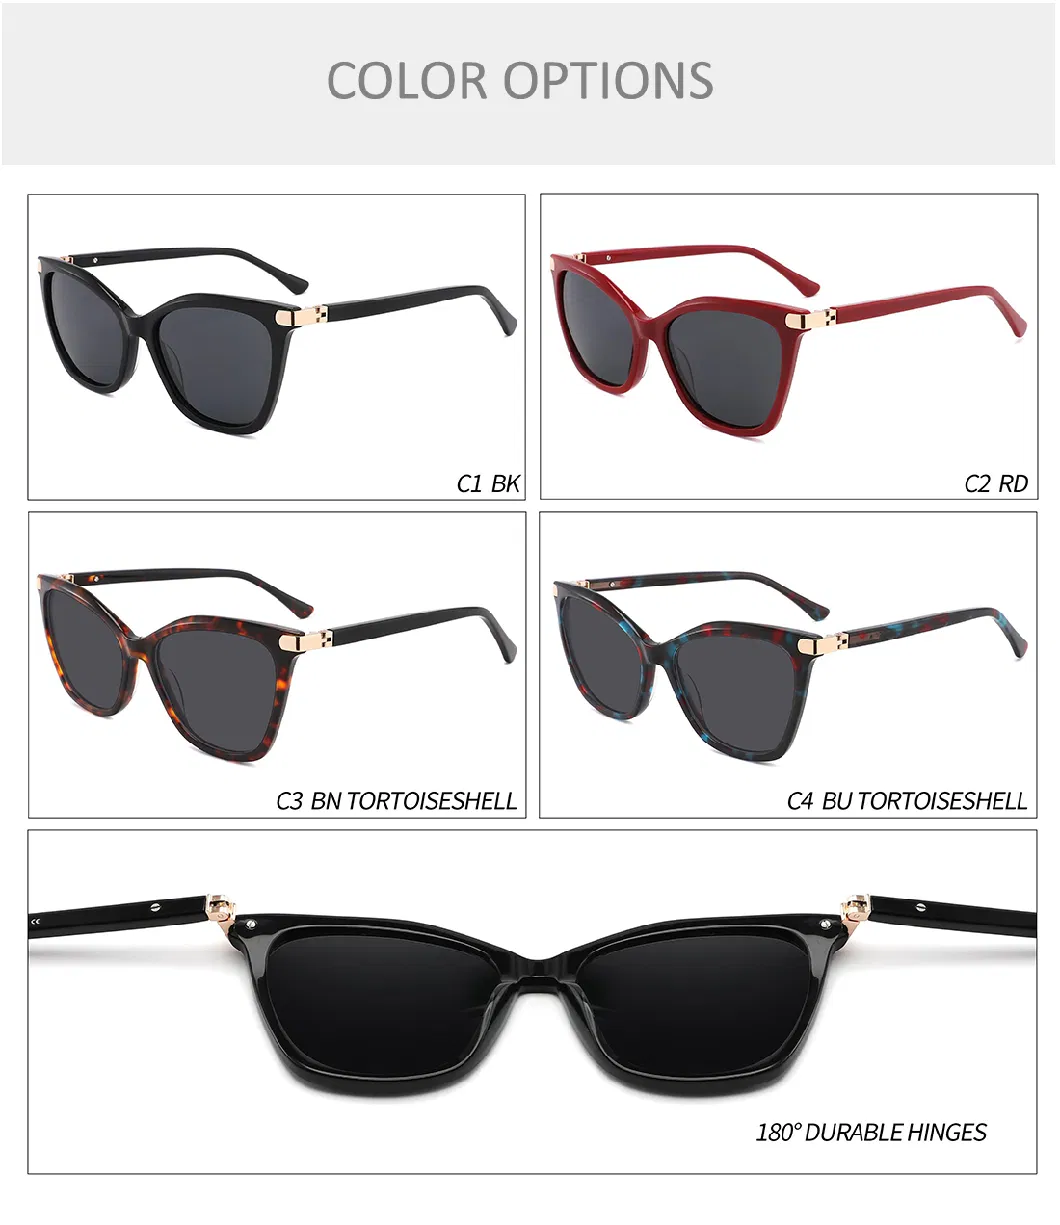 Fashion Style Wenzhou Manufacture 180 Durable Spring Hinges Sunglasses